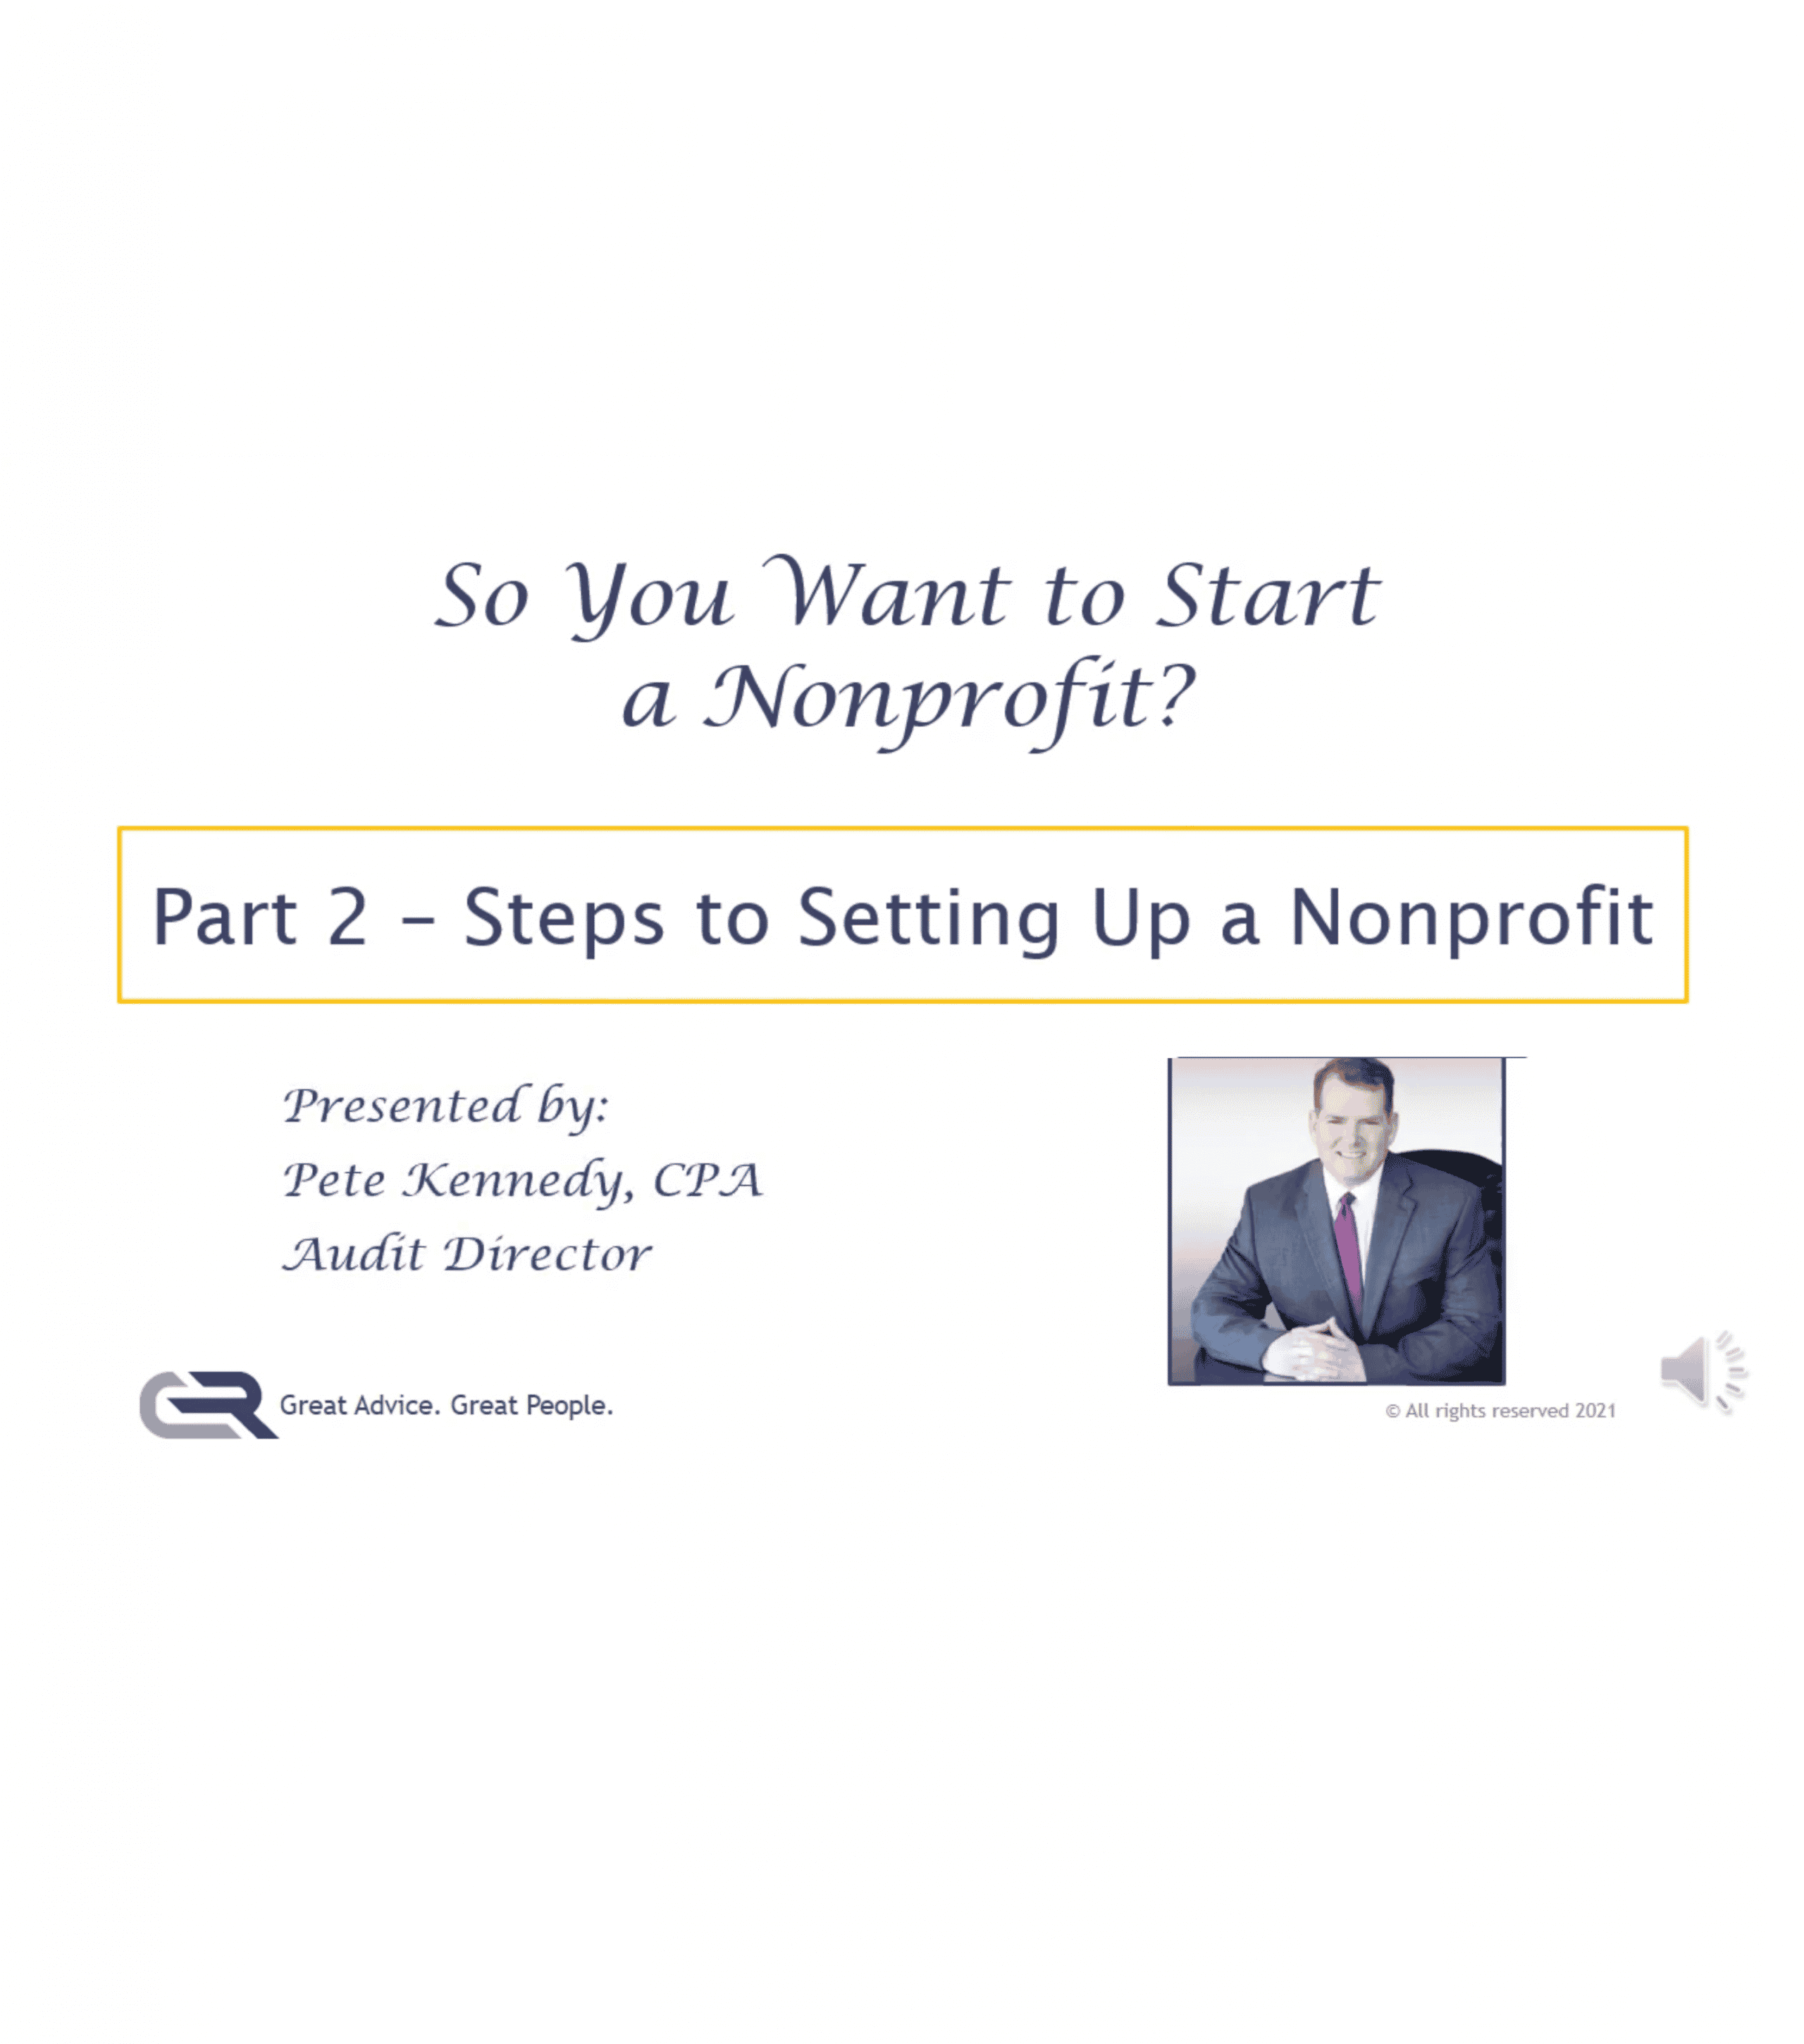 So You Want To Start a Nonprofit - Part 2